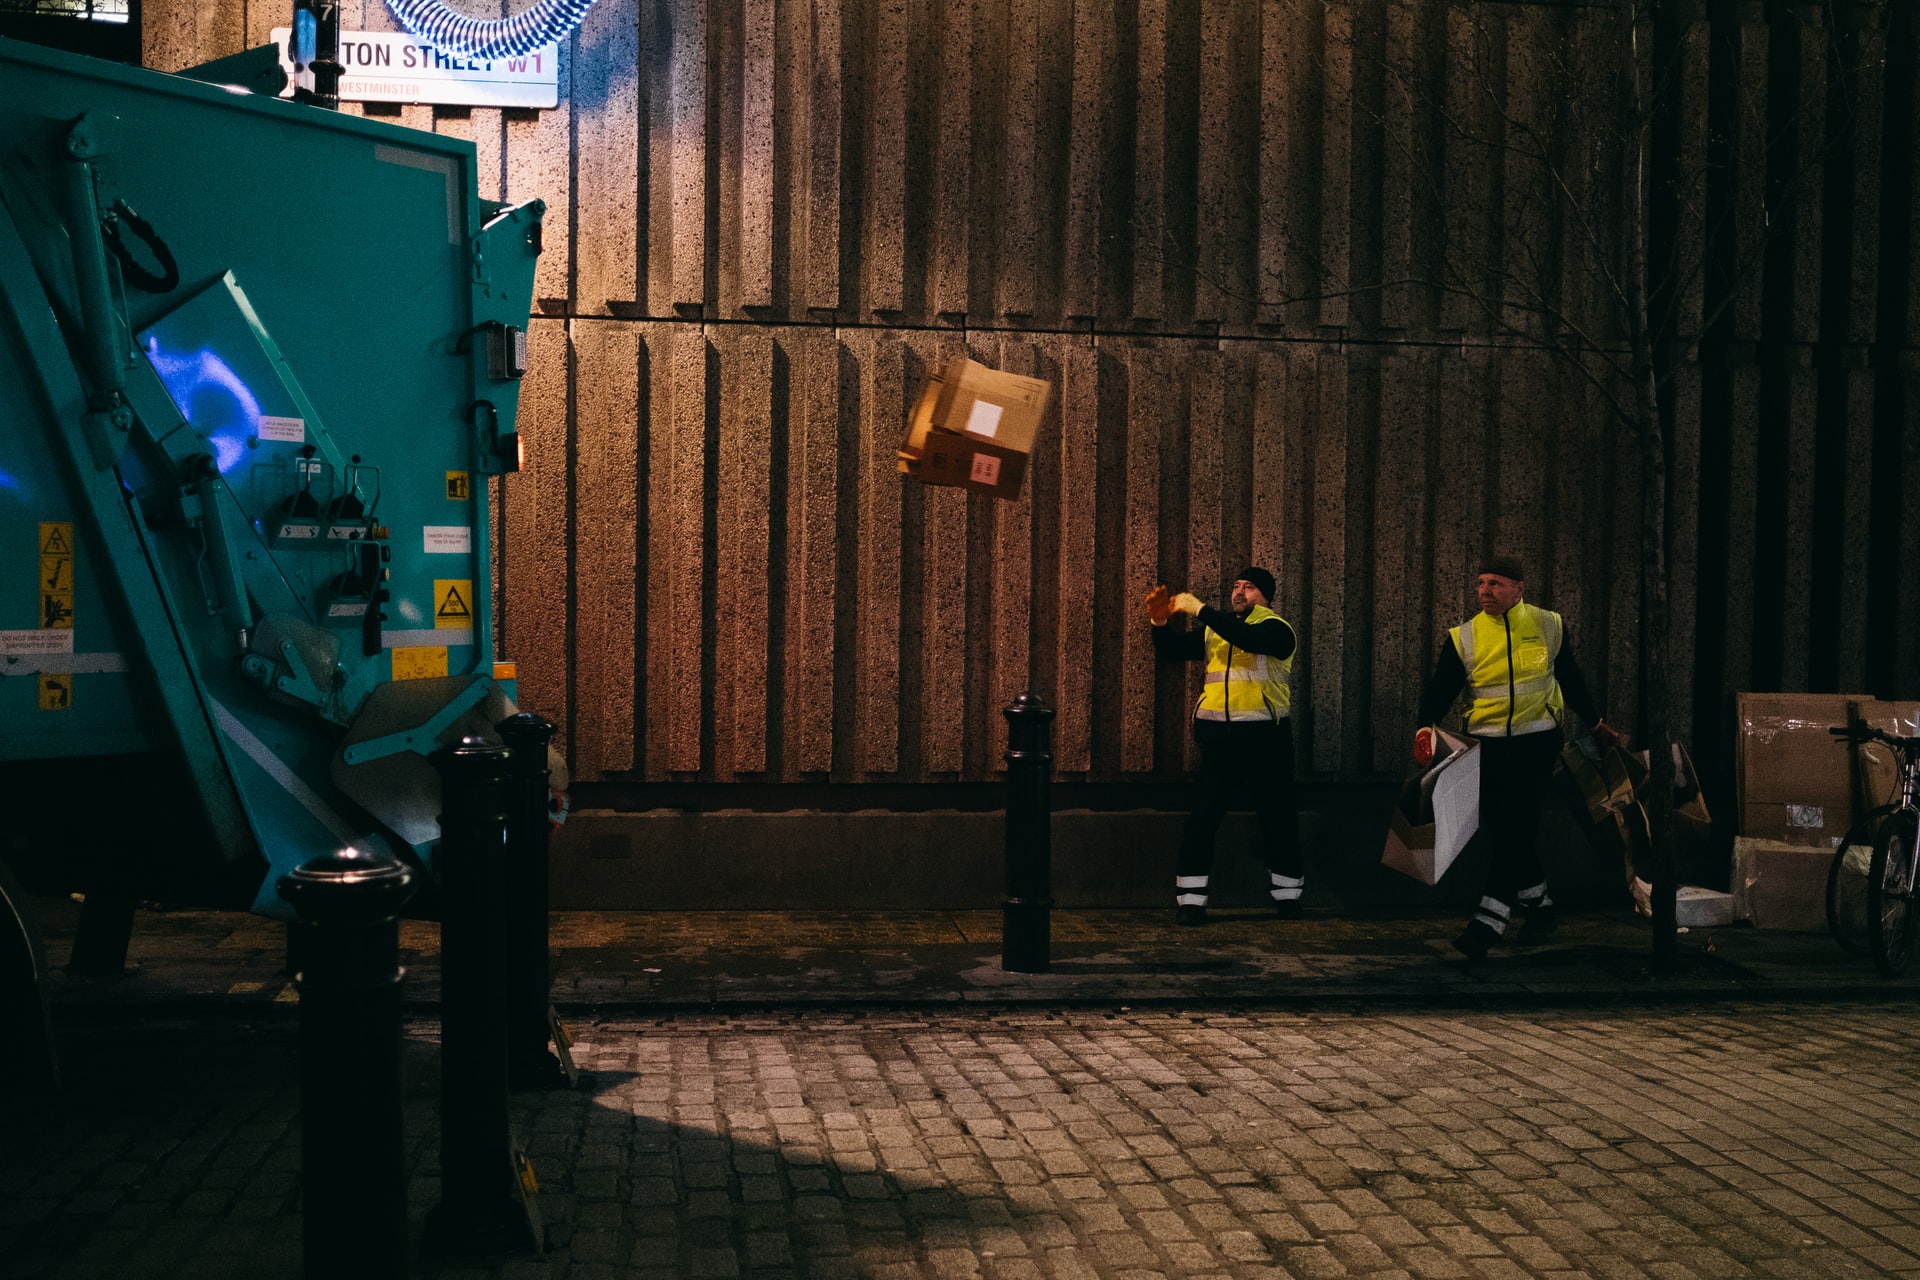 photograph of 2 men wearing hi-viz jackets and throwing empty cardboard boxes onto a rubbish collection truck at night-time